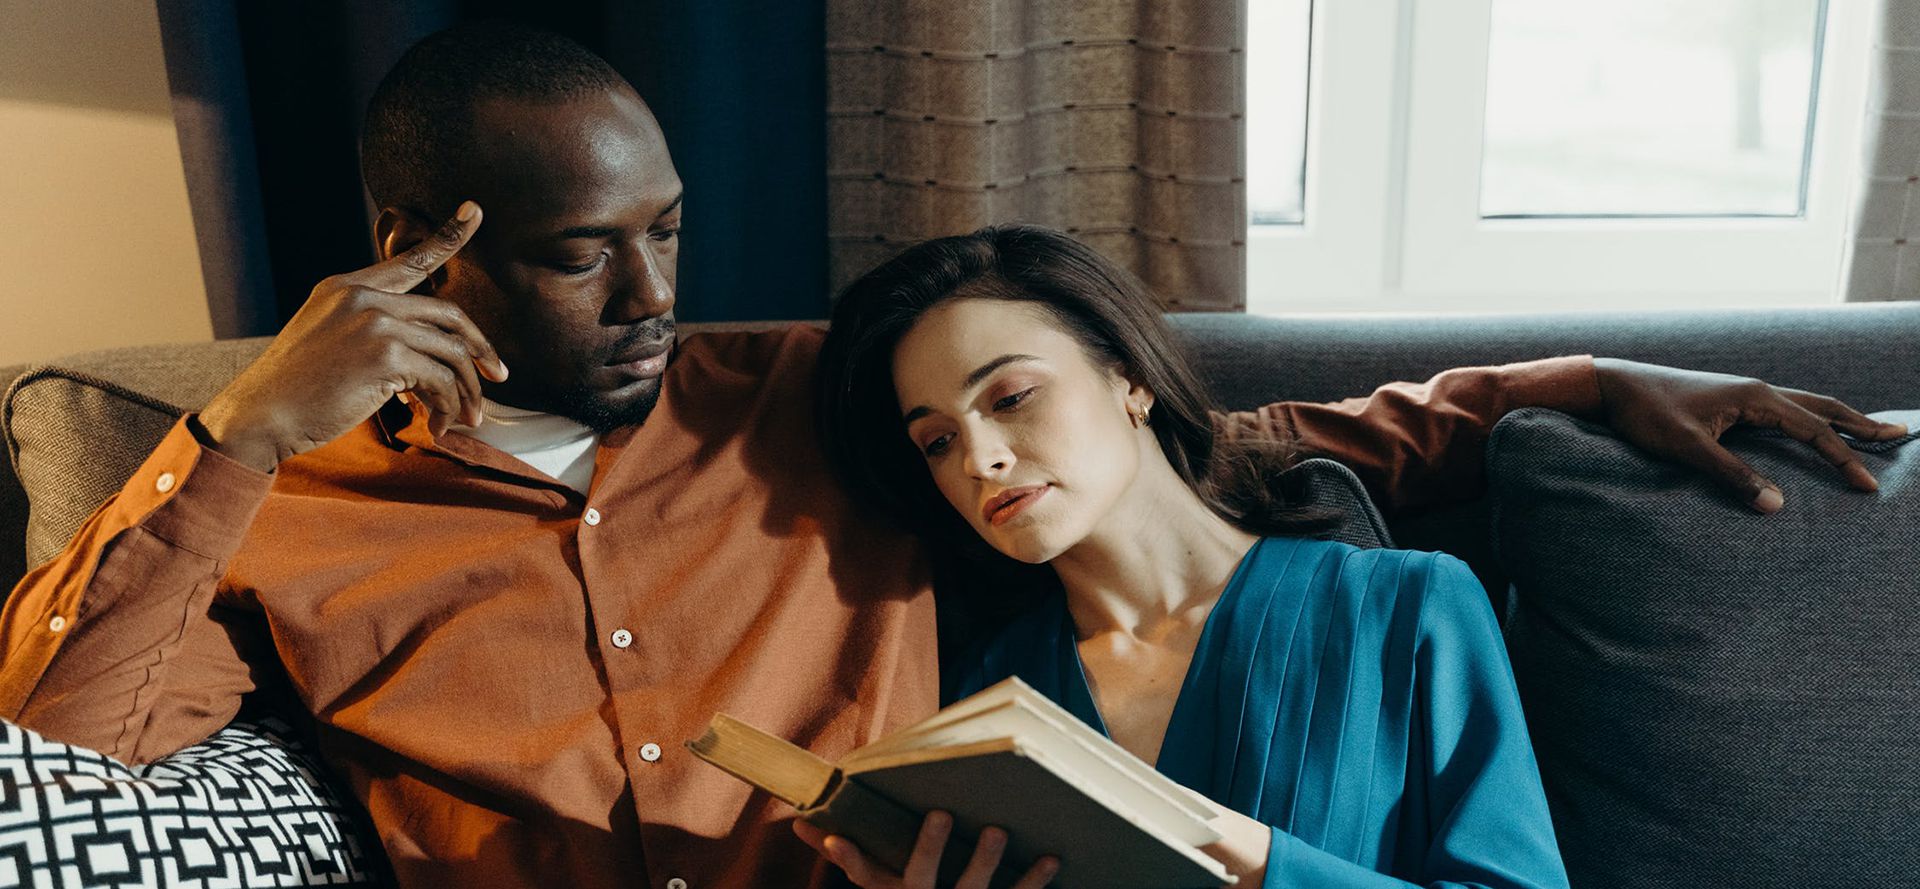 Widower reading book with woman.